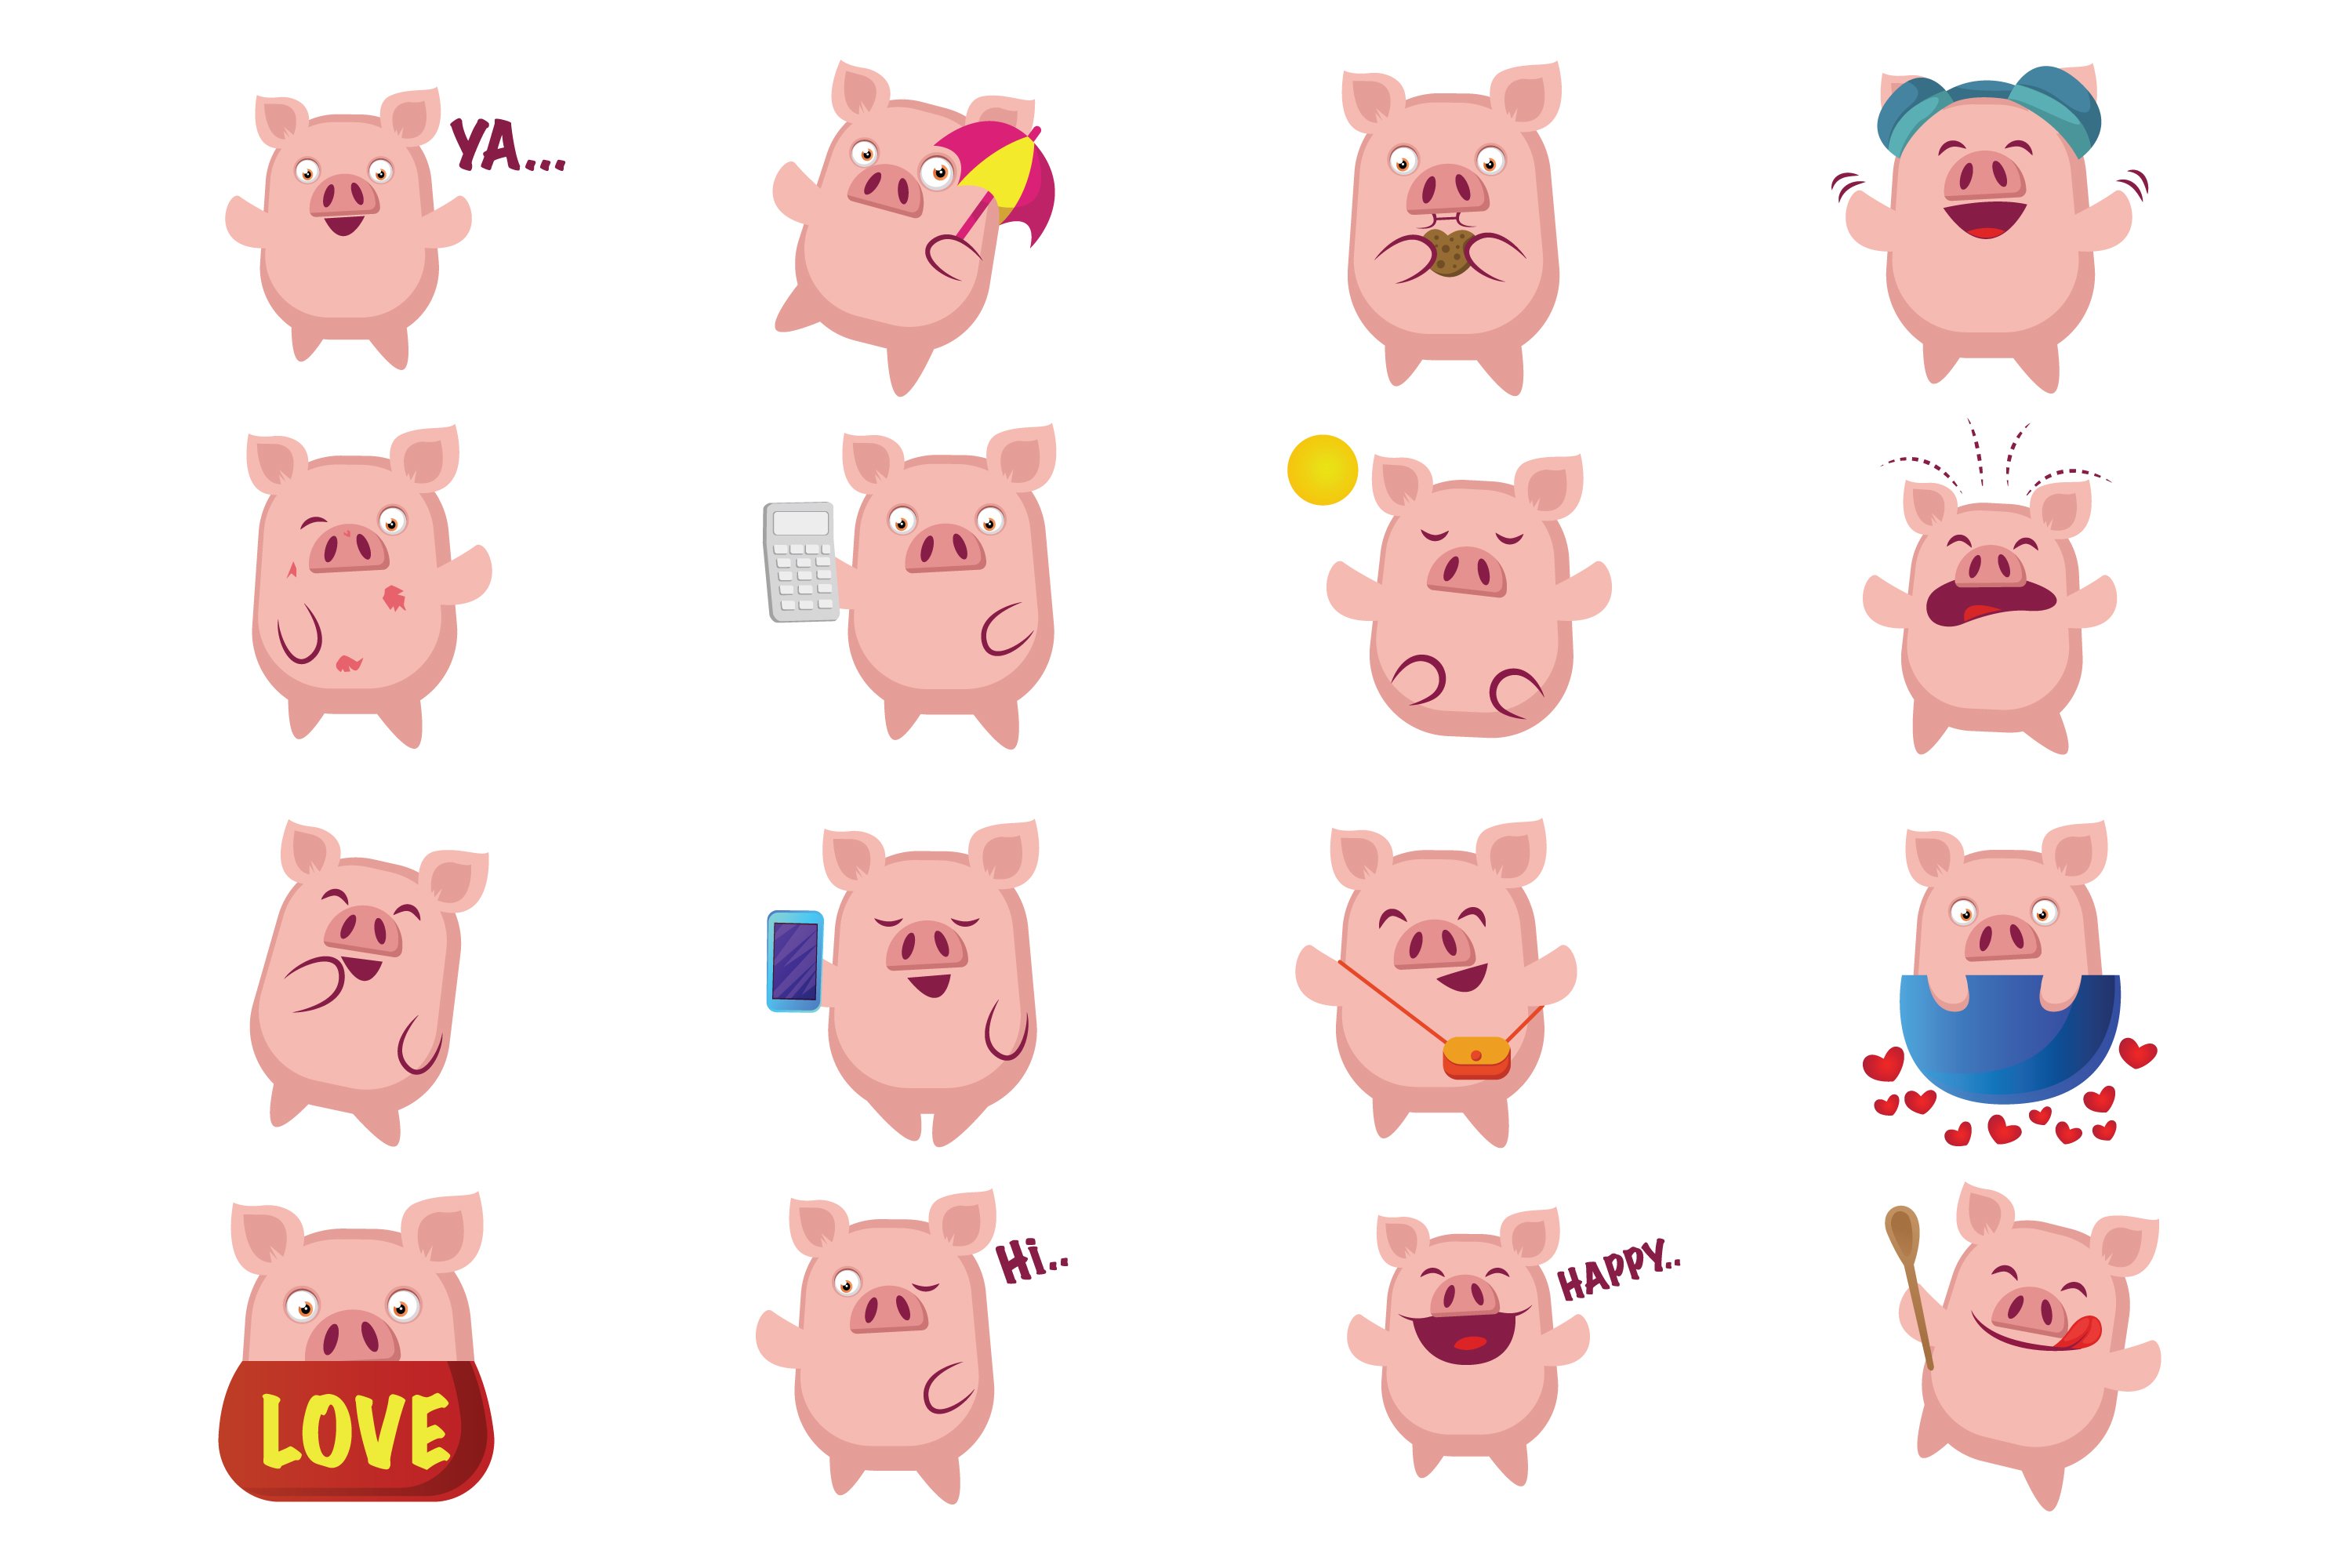 A selection of cartoon images of pigs emoticons.